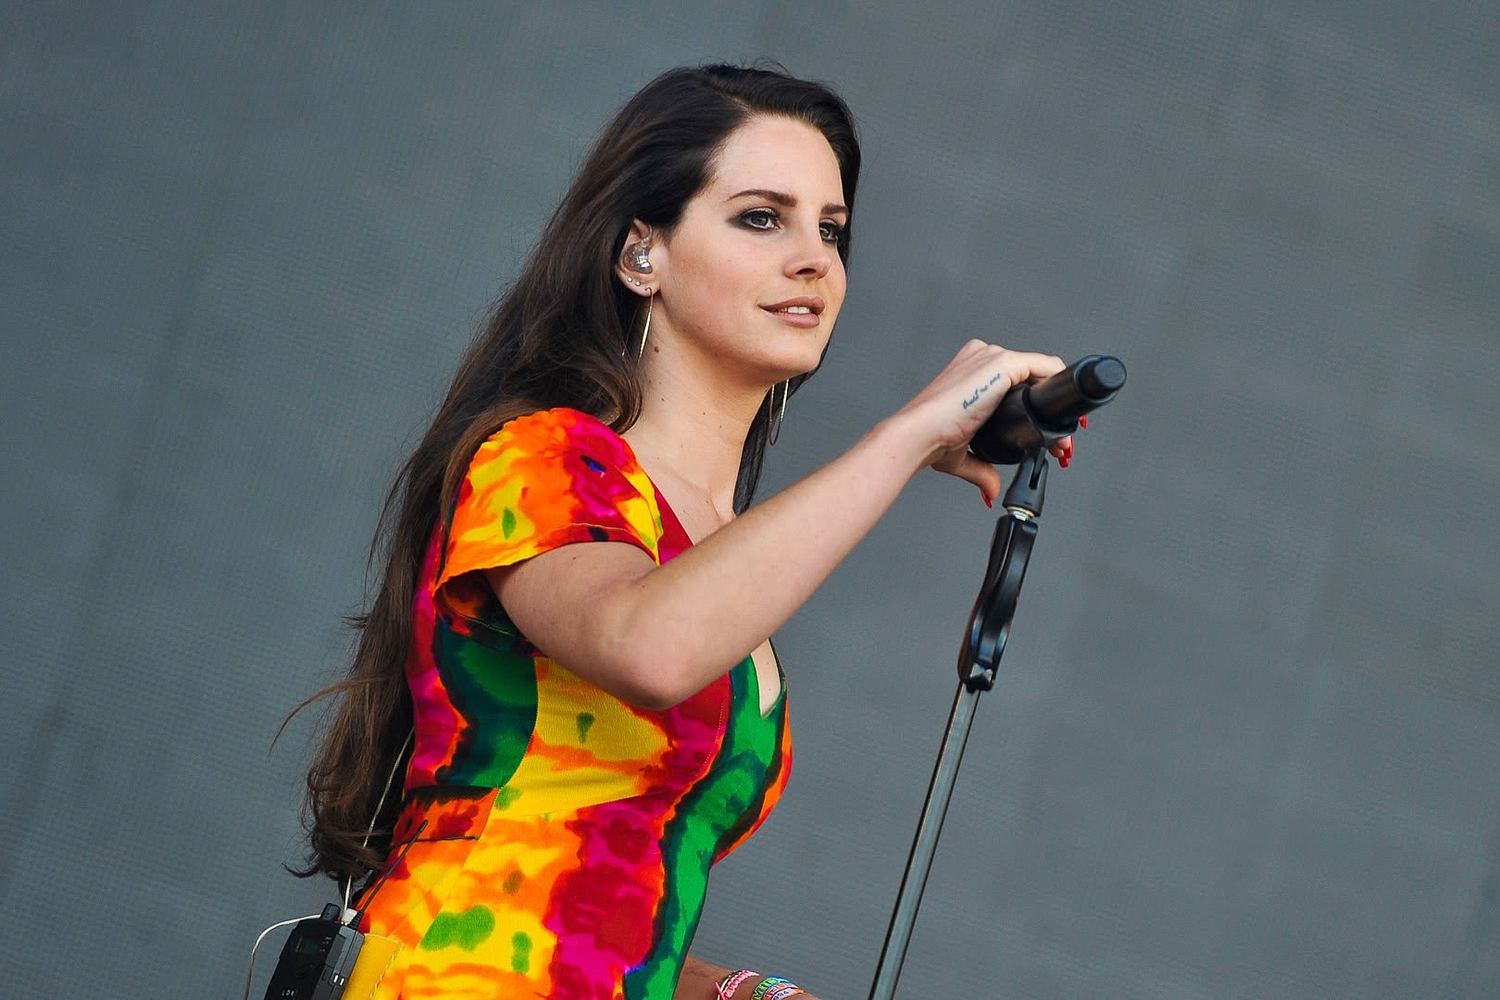 Lana Del Rey guests on new Emile Haynie track, ‘Wait For Life’